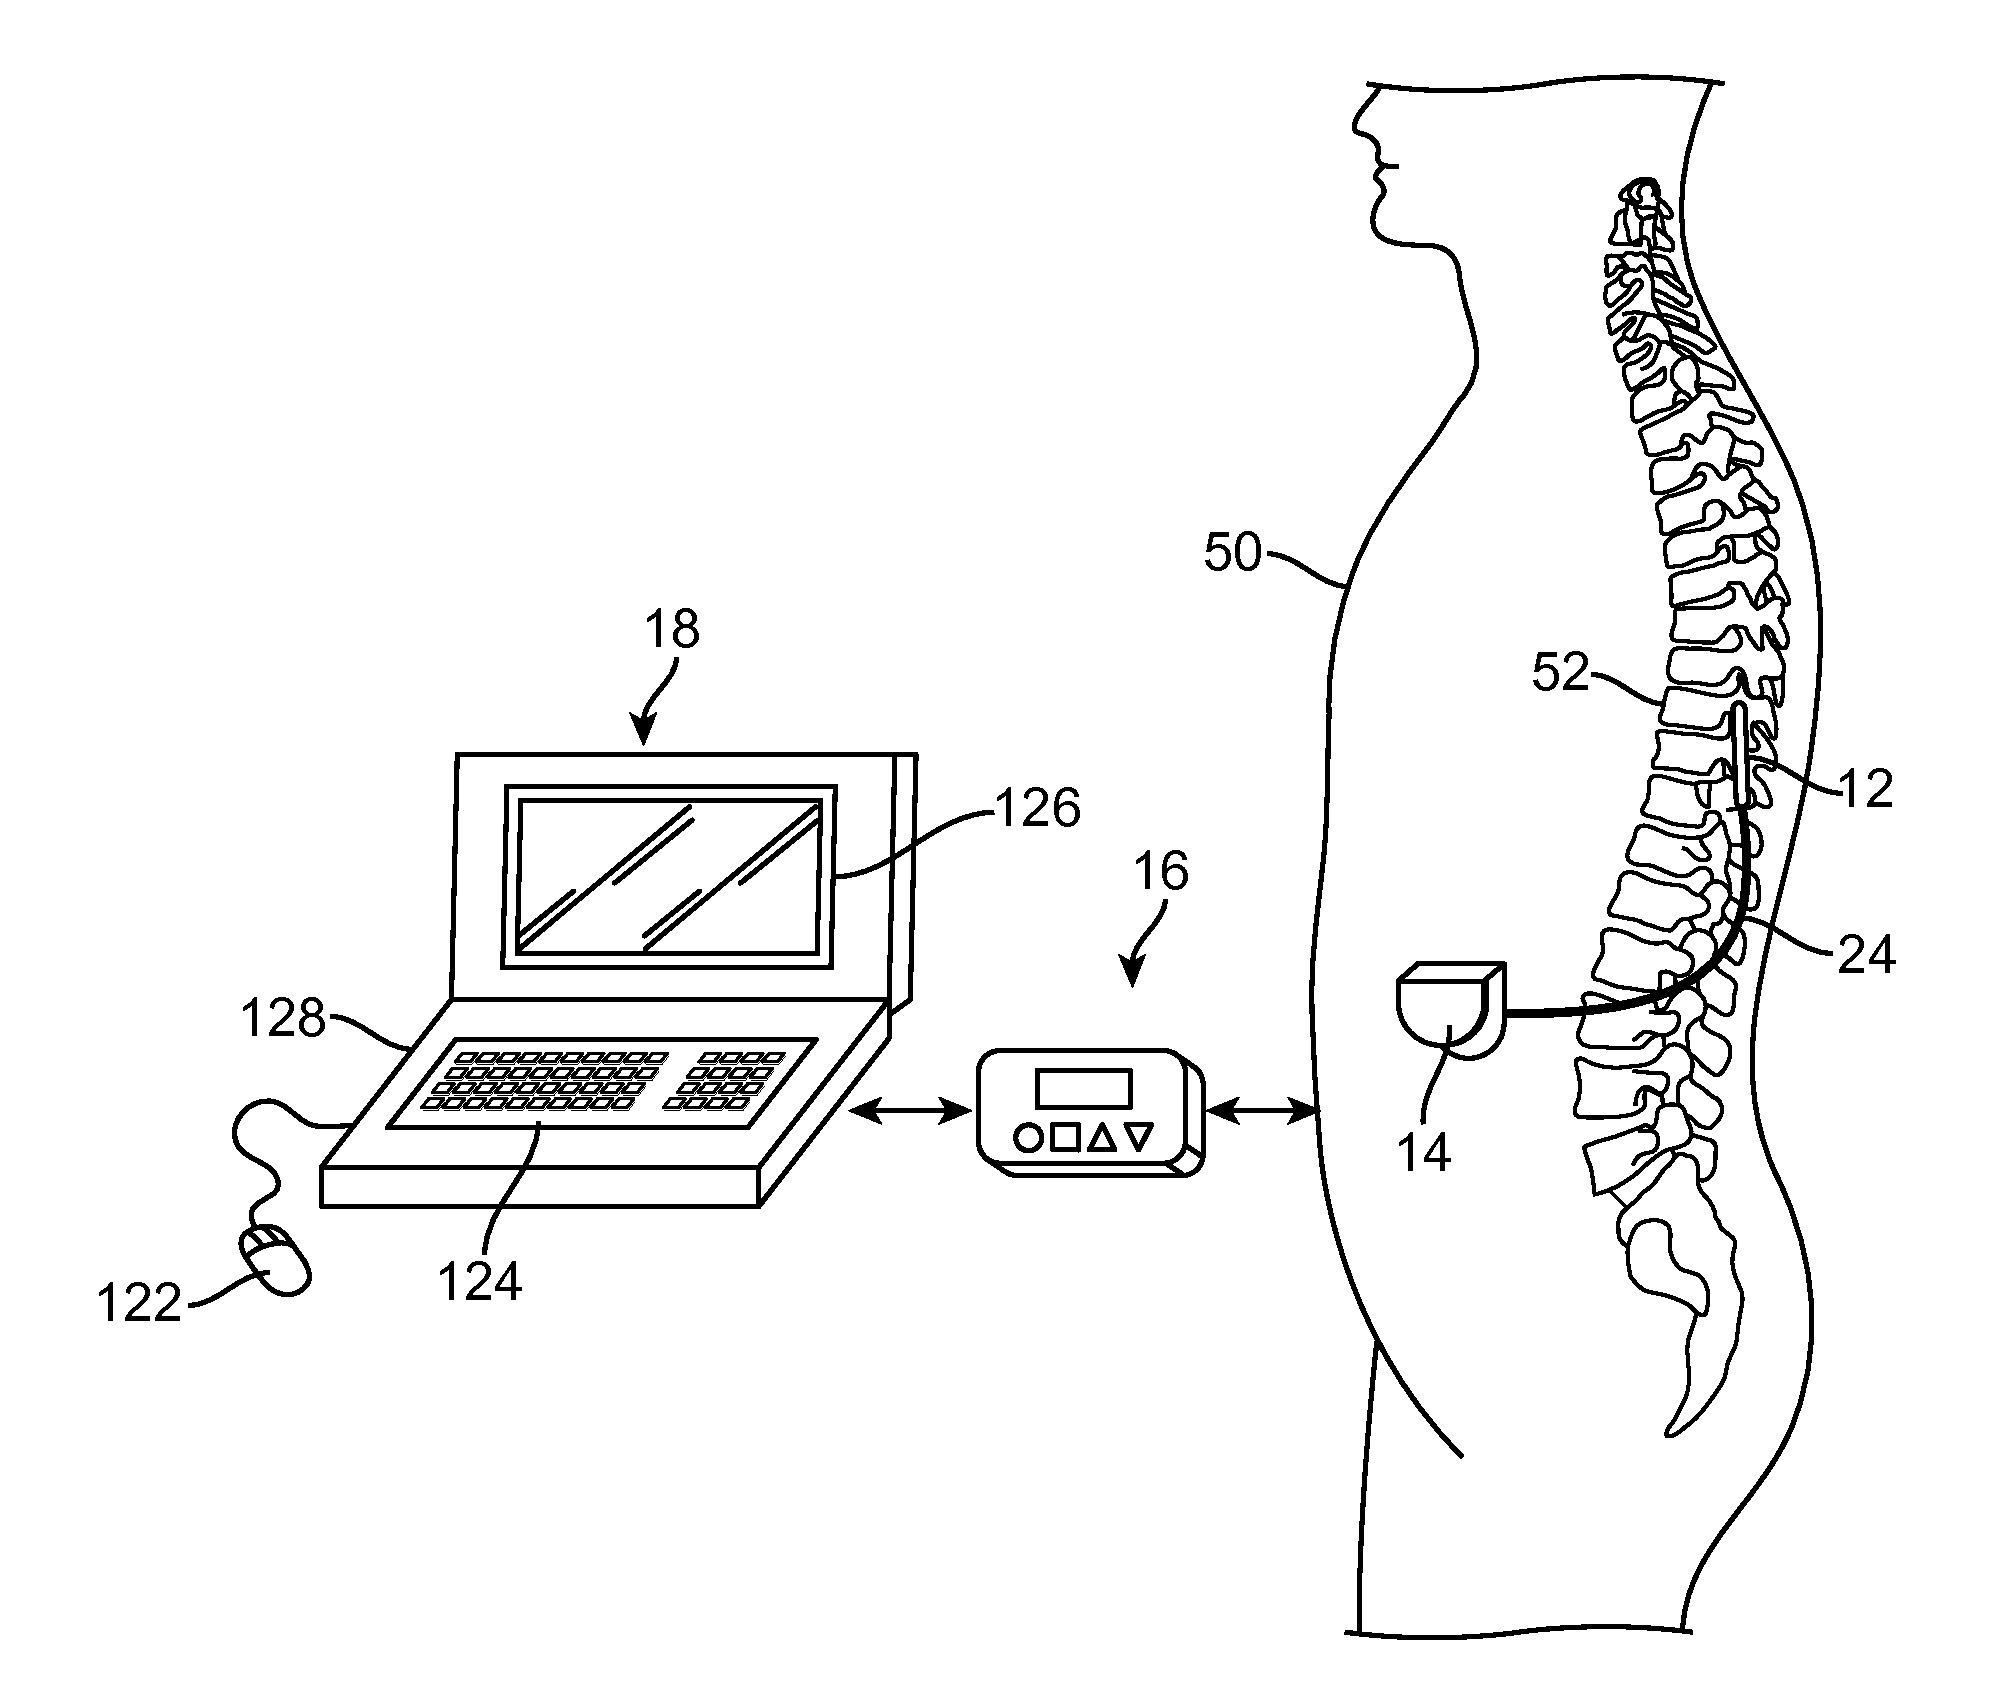 System and method for storing application specific and lead configuration information in neurostimulation device